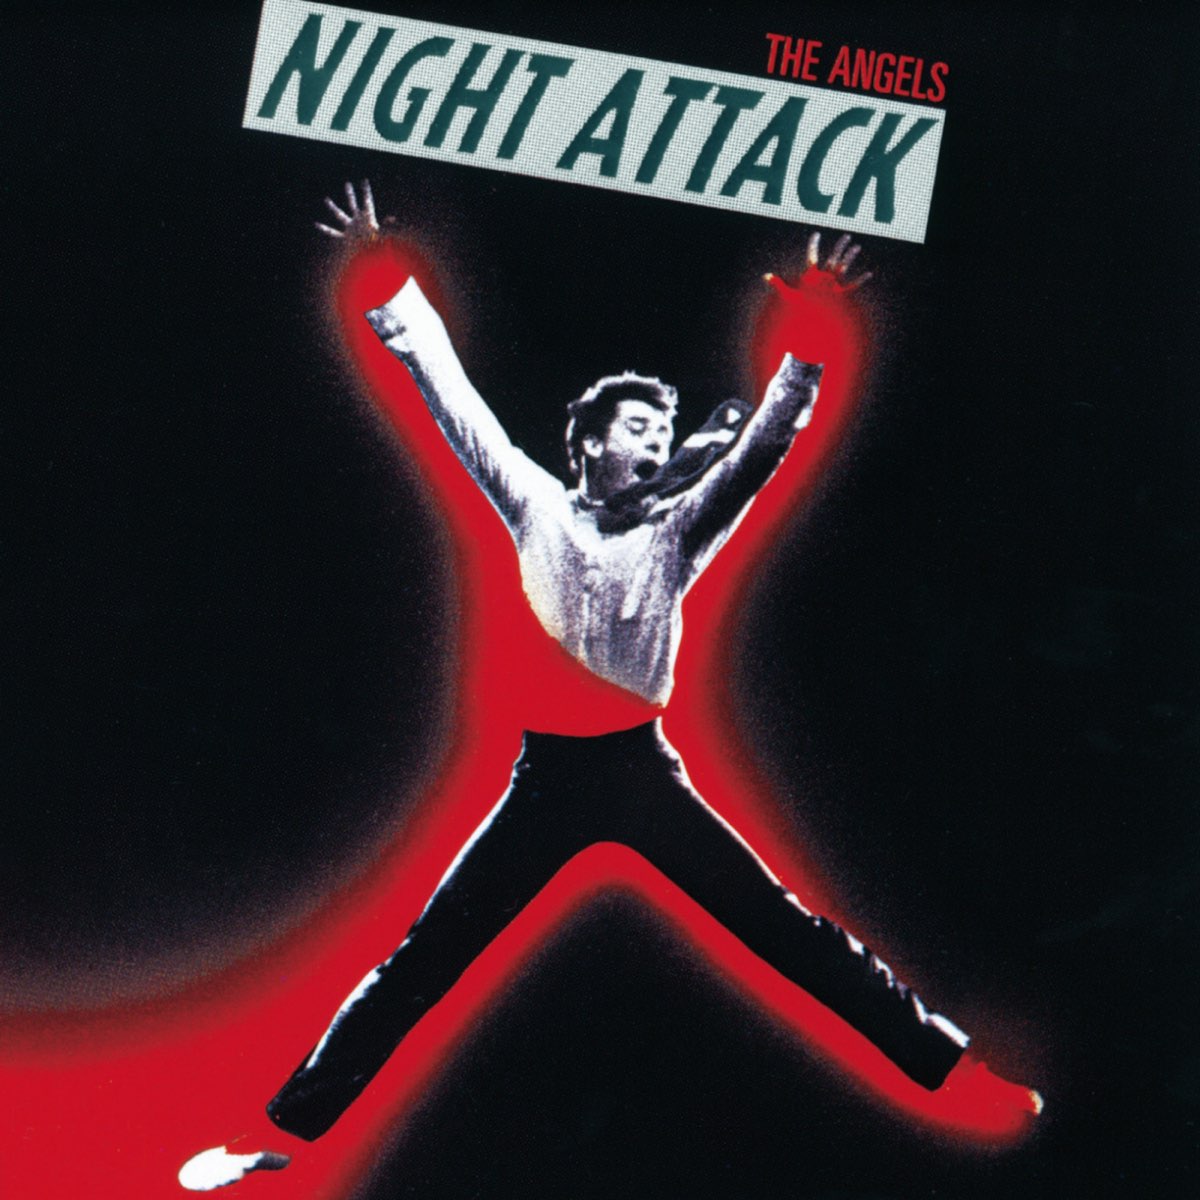 Night Attack - Album by The Angels - Apple Music